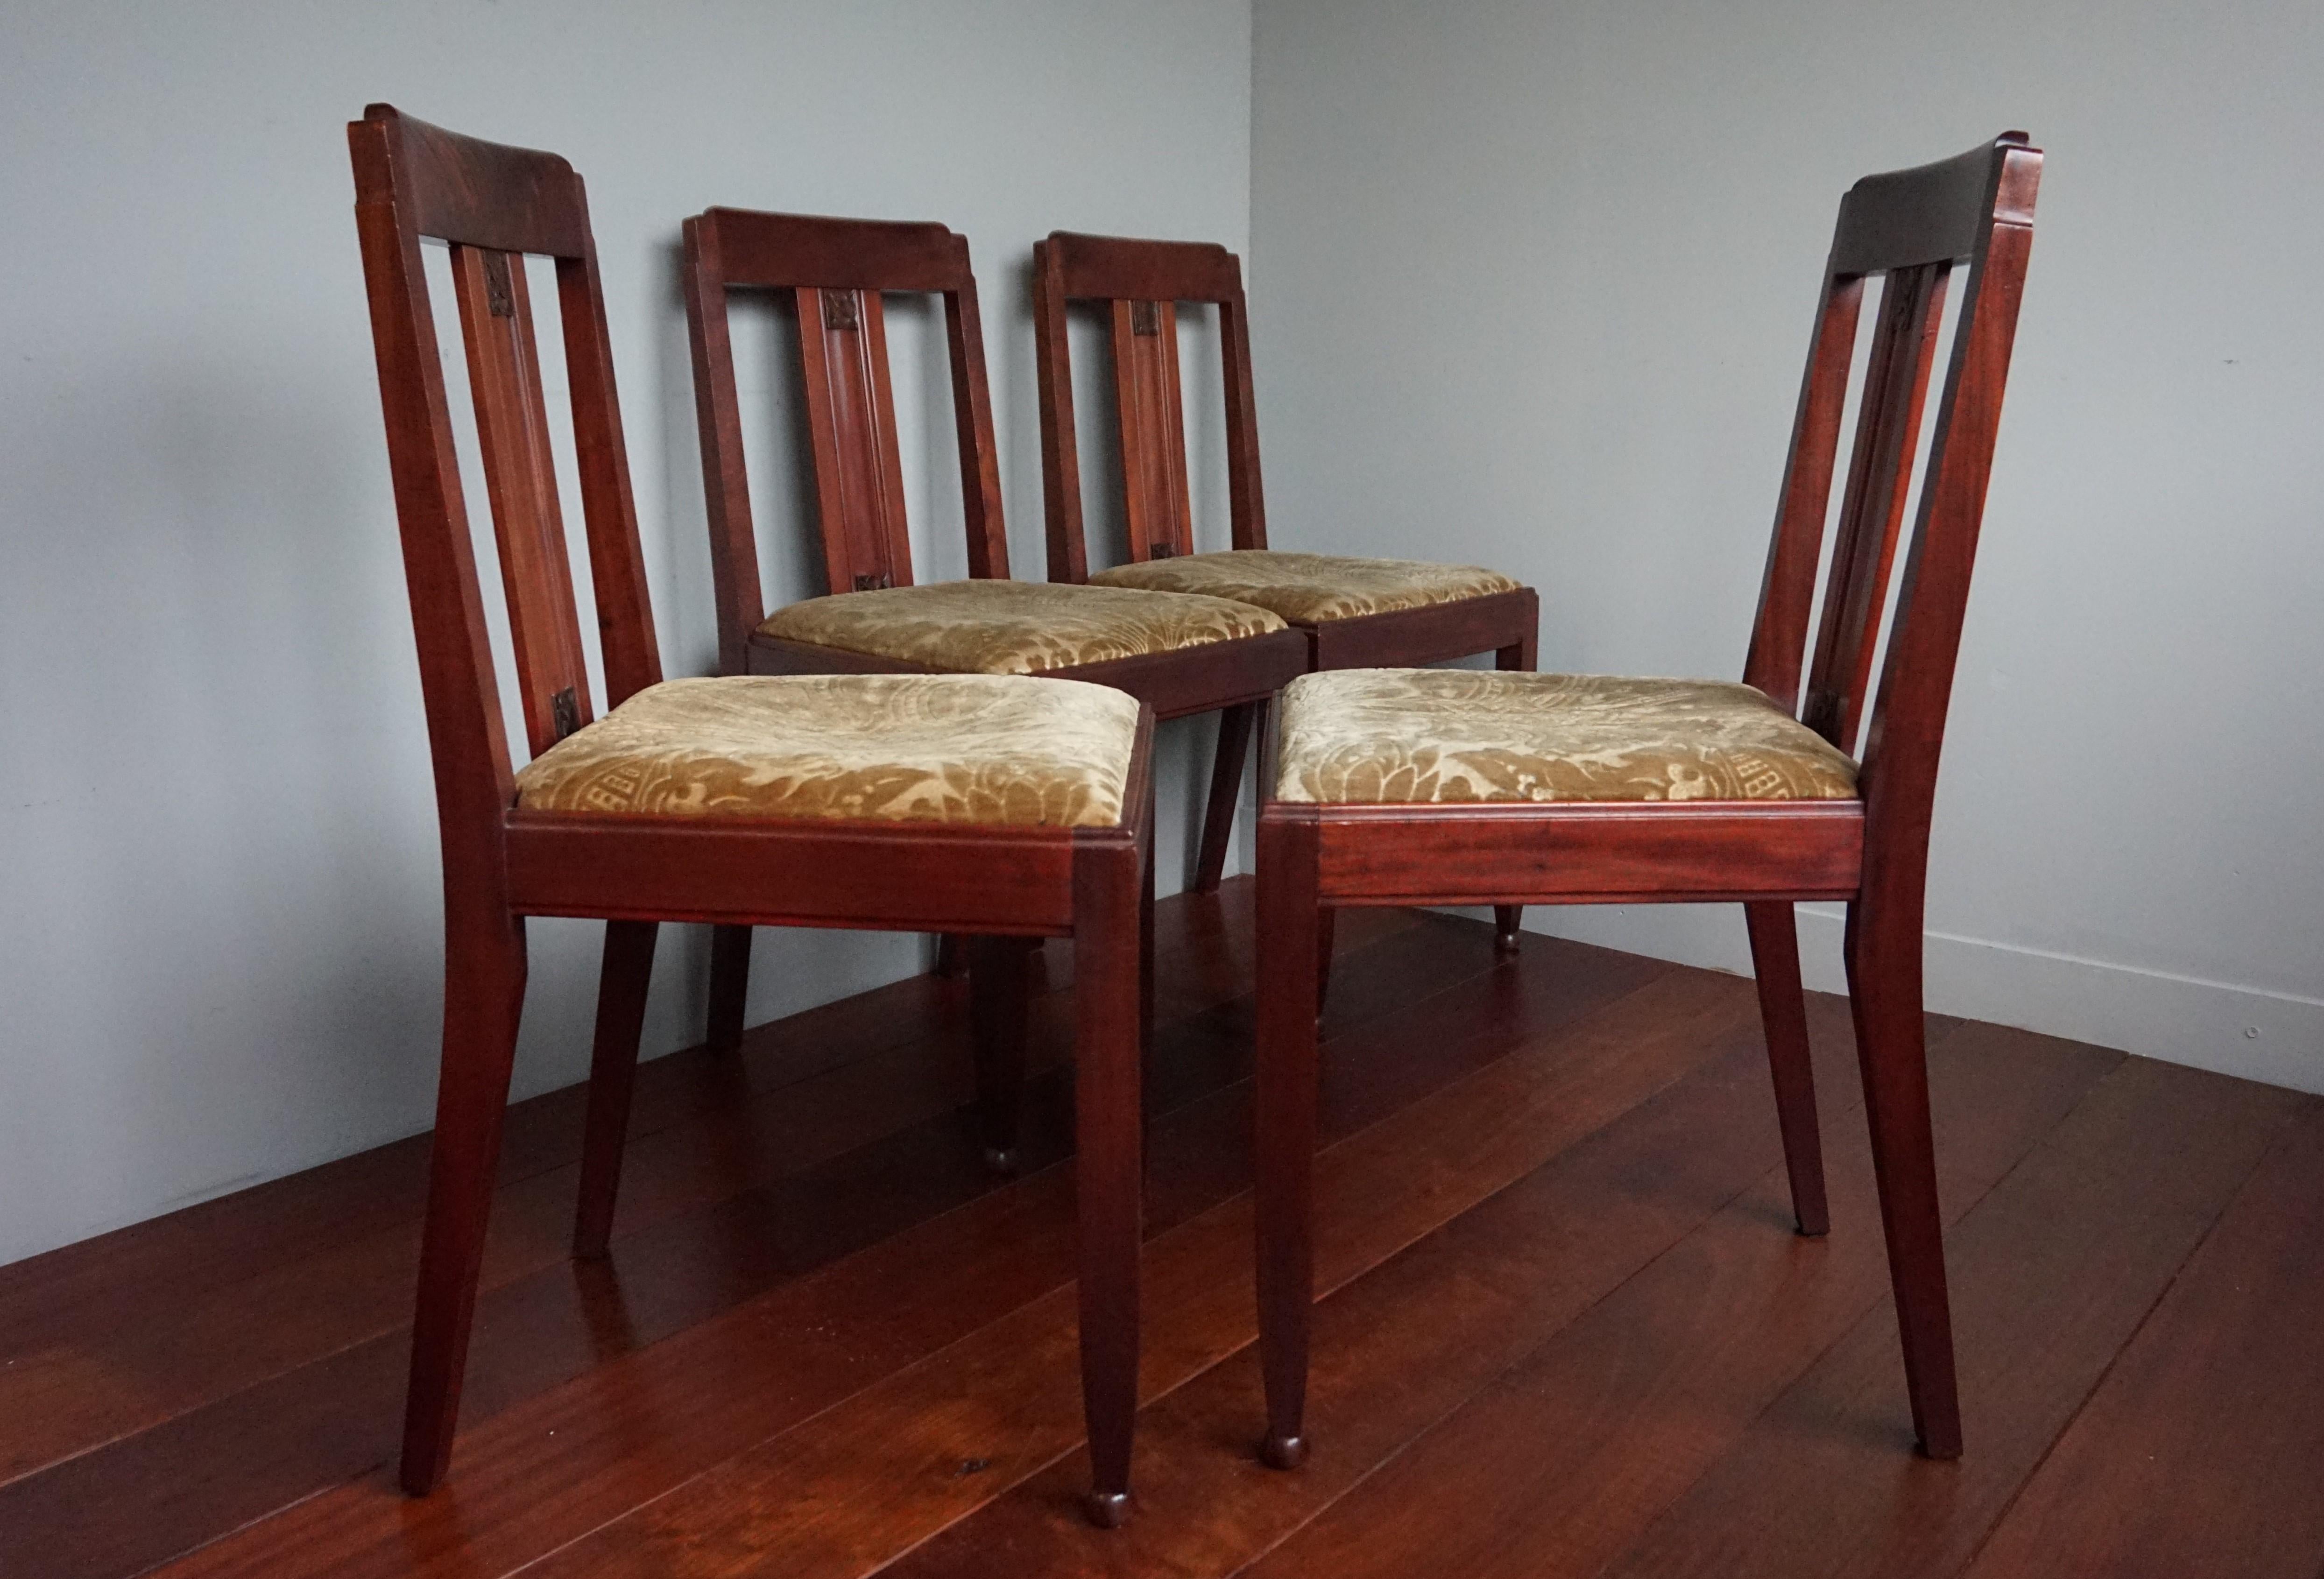 Top quality Arts and Crafts workmanship chairs, in near-mint condition.

If you are looking for the best condition and materials antiques only then this set of four dining chairs could be yours to own, use and enjoy soon. Over the years we have sold